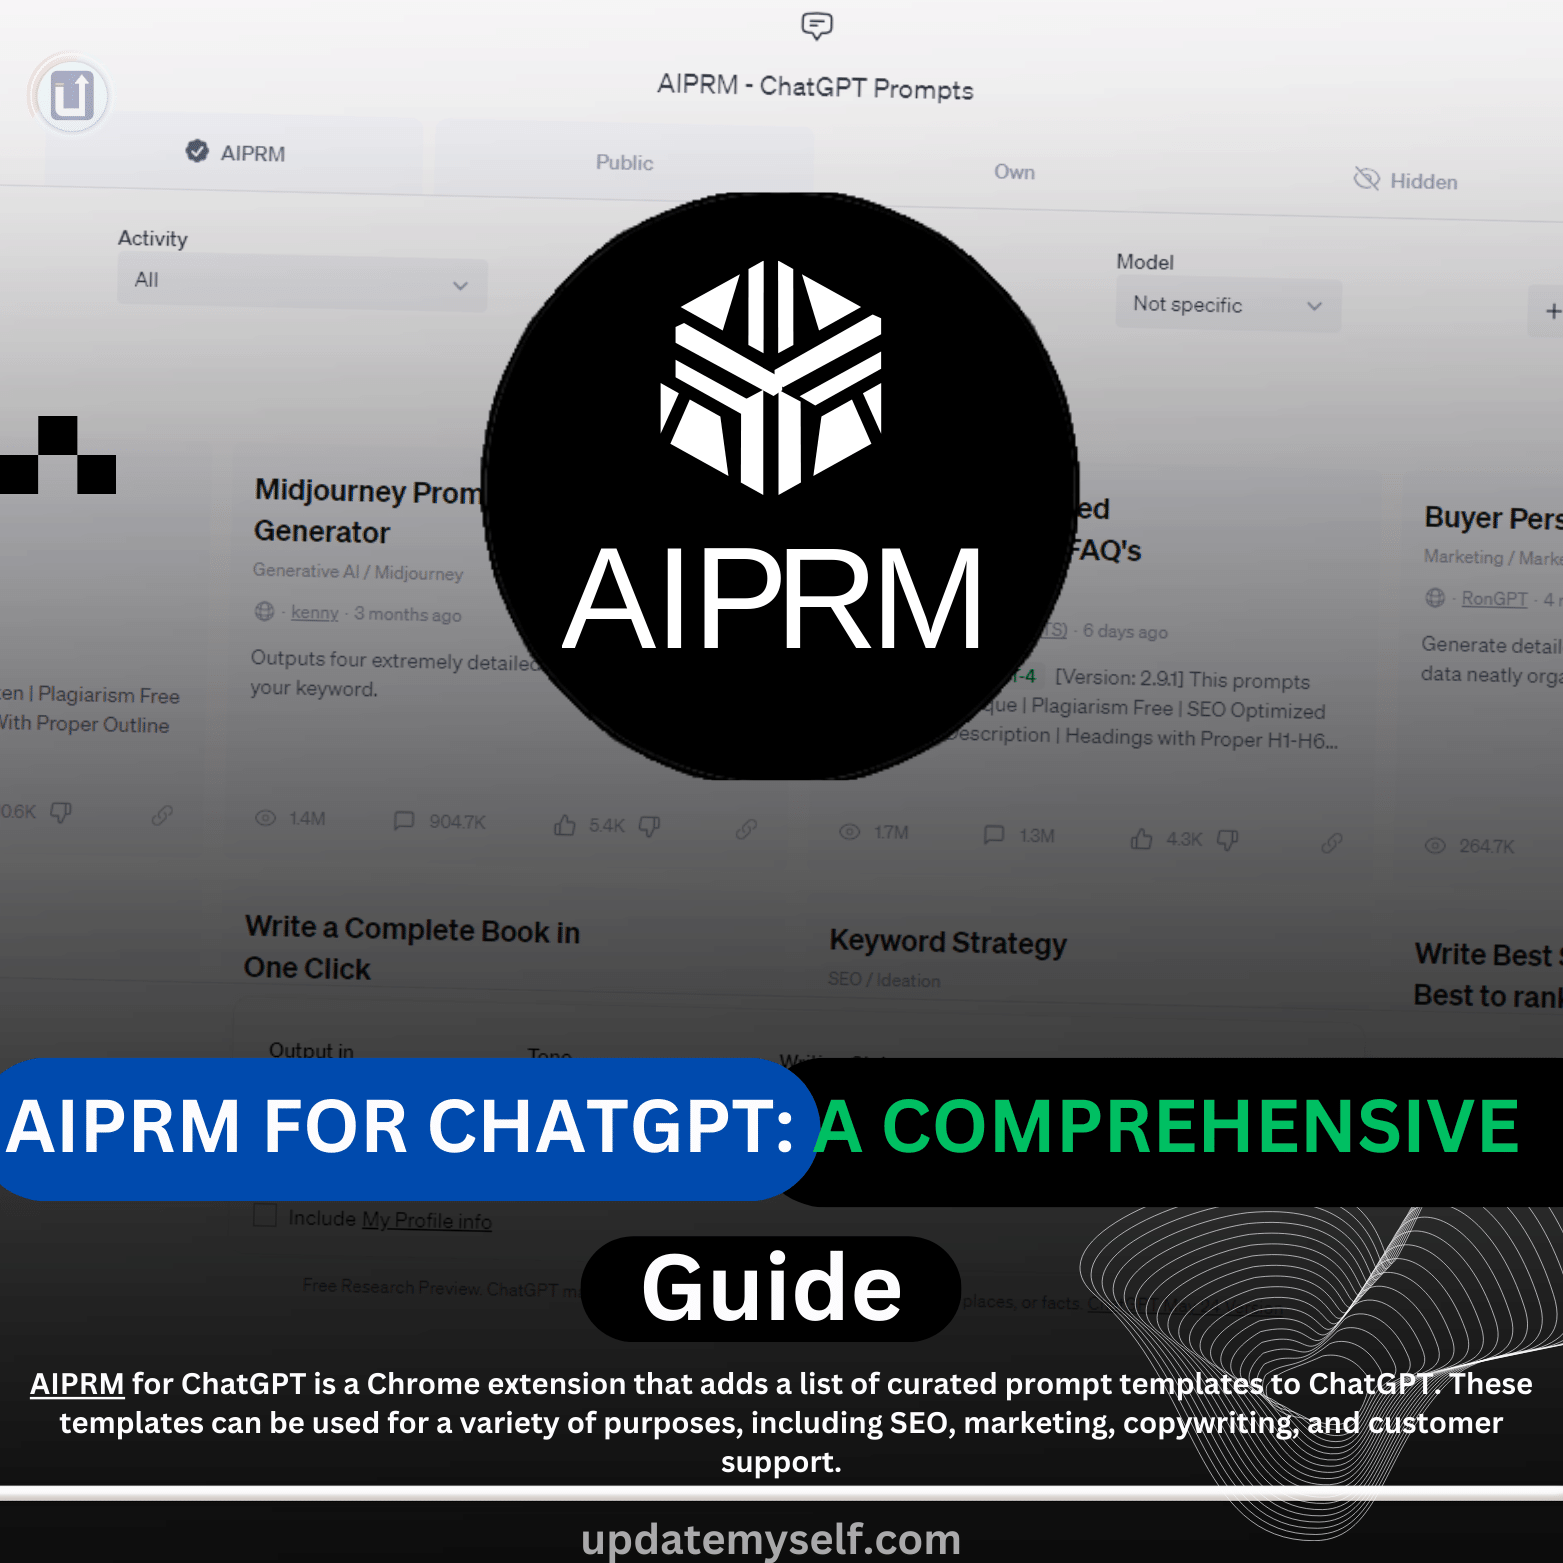 AIPRM for ChatGPT